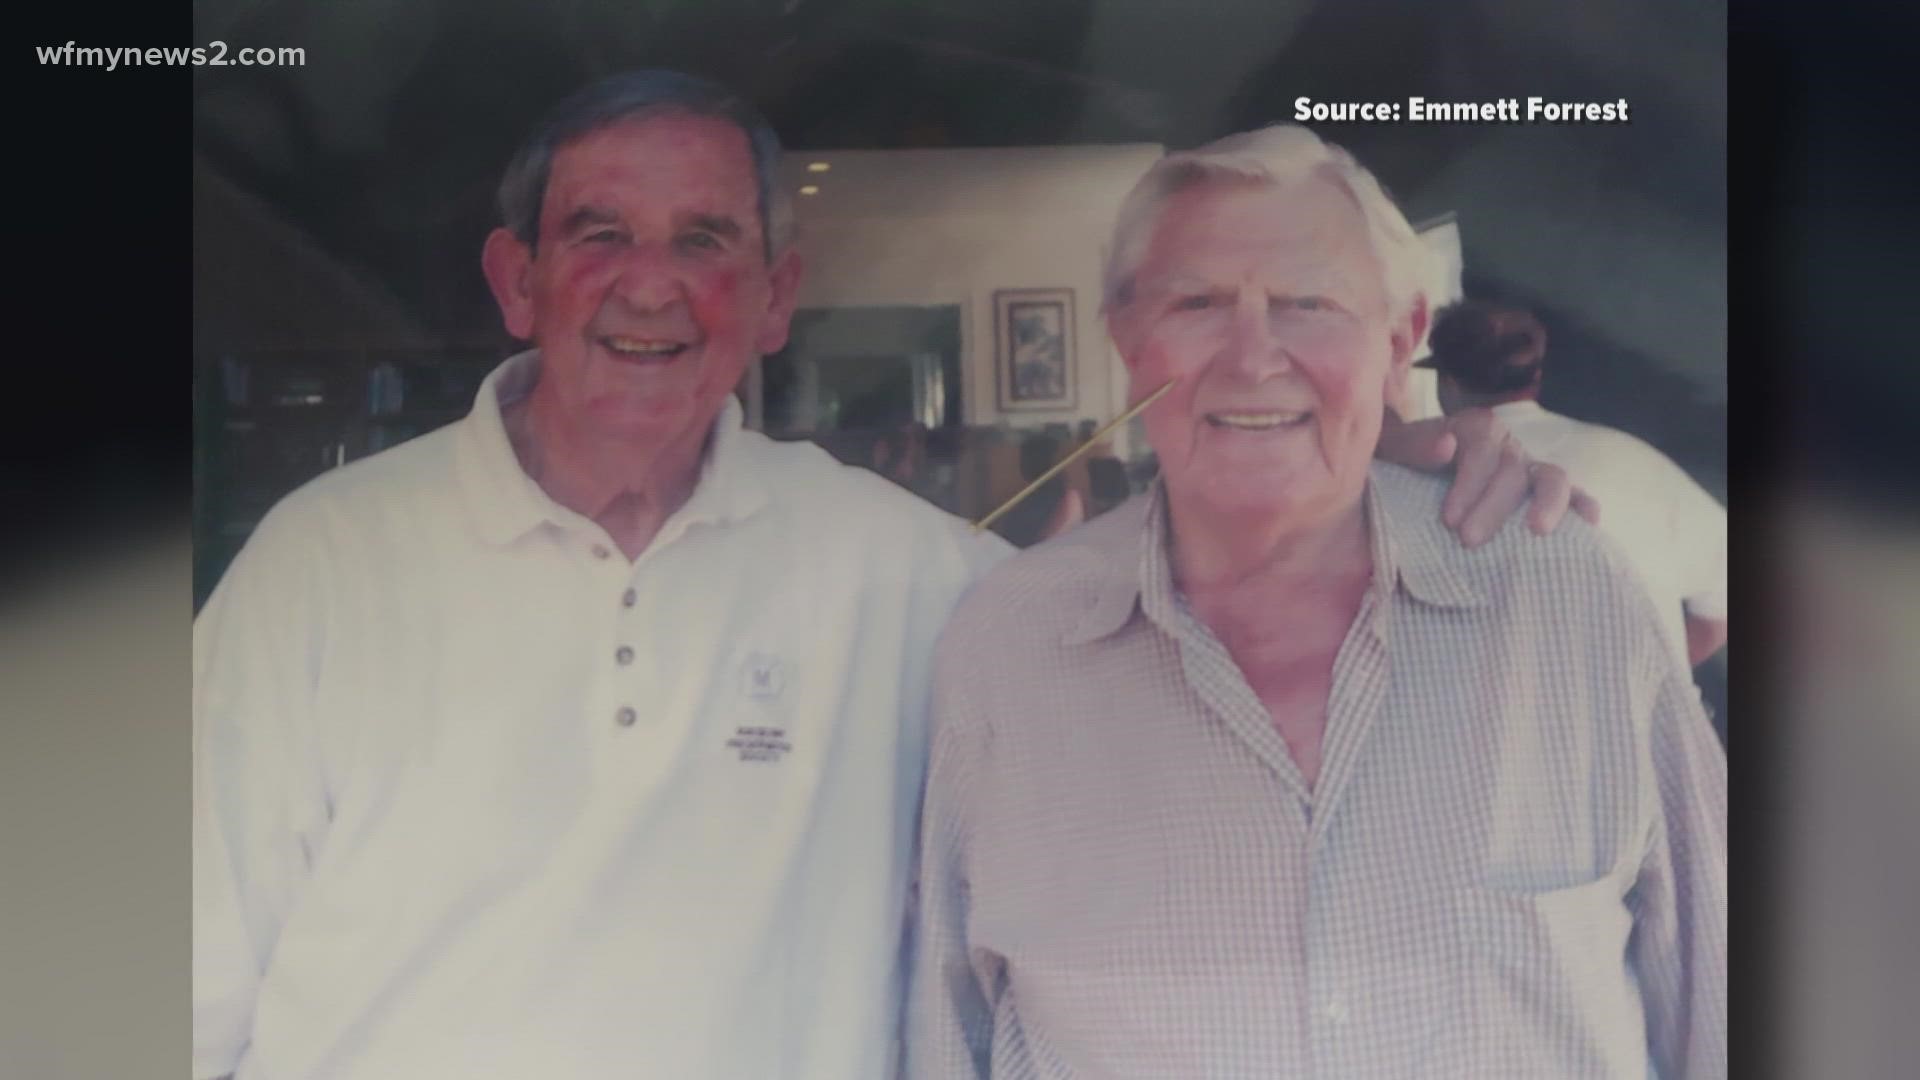 Emmett Forest had a special bond with Mount Airy’s beloved Andy Griffith. Emmett’s daughter, Terri Champney, shares her favorite memory of that friendship.